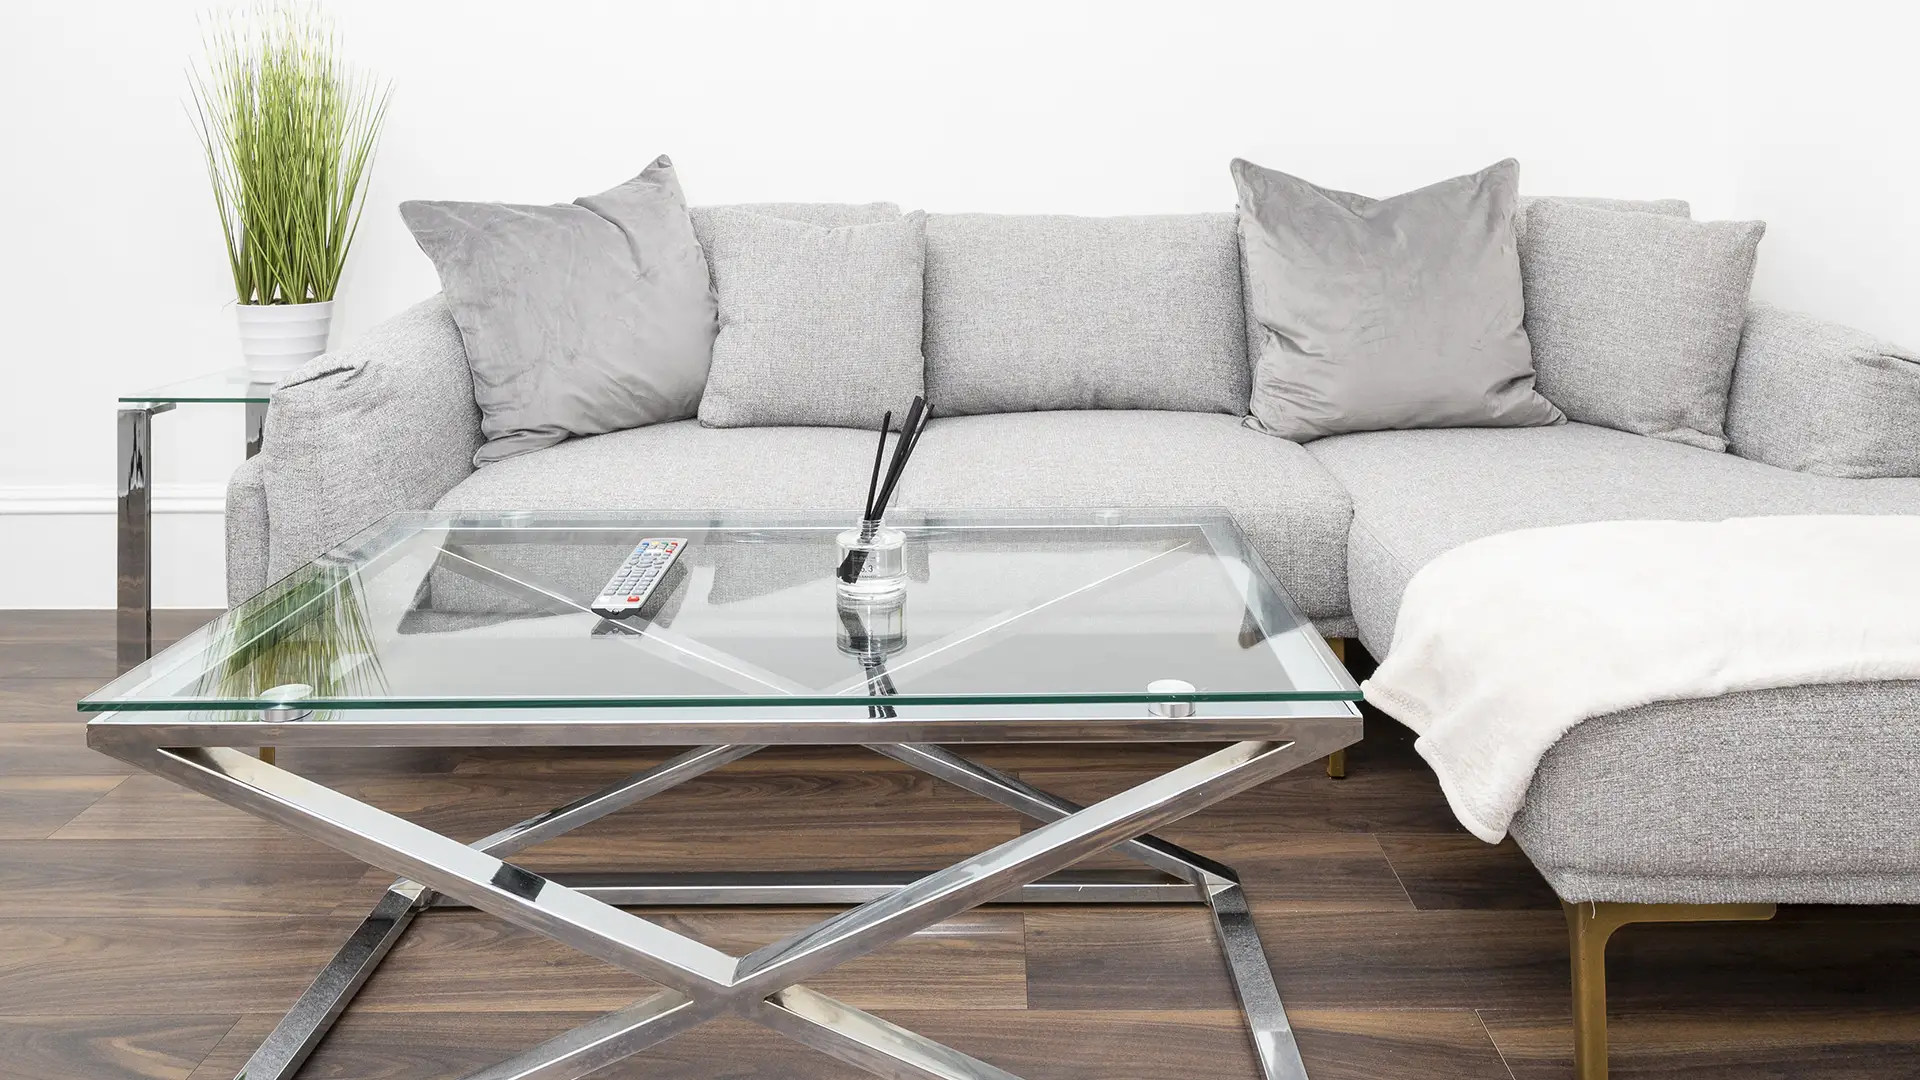 spacious and comfortable couch with a sturdy glass table